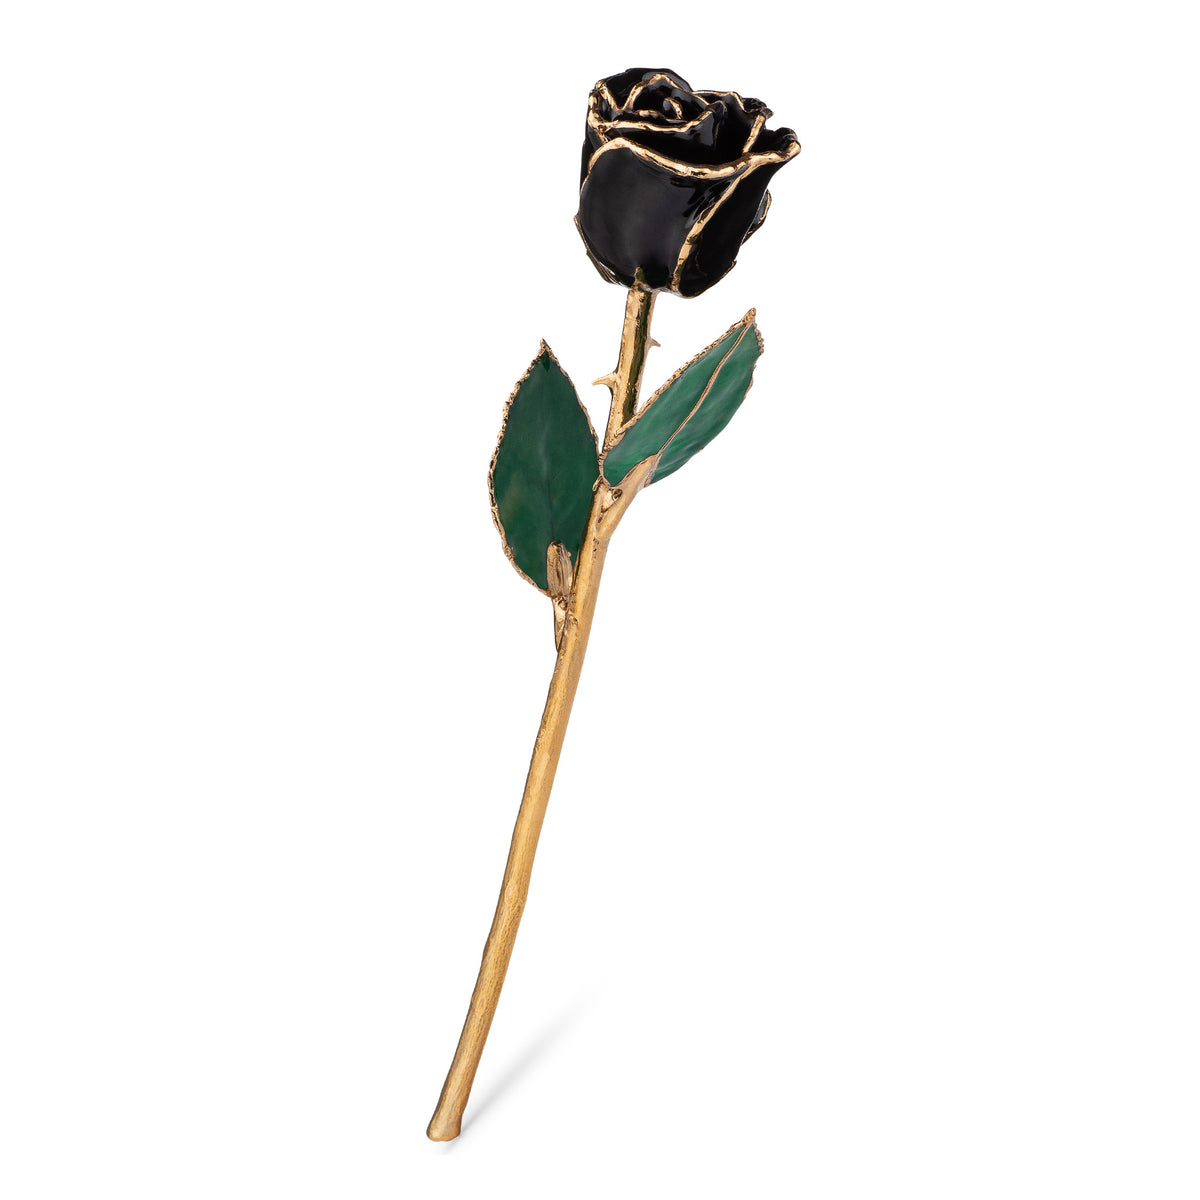 24K Gold Trimmed Forever Rose in Black Color with View of Stem, Leaves, and Rose Petals and Showing Detail of Gold Trim